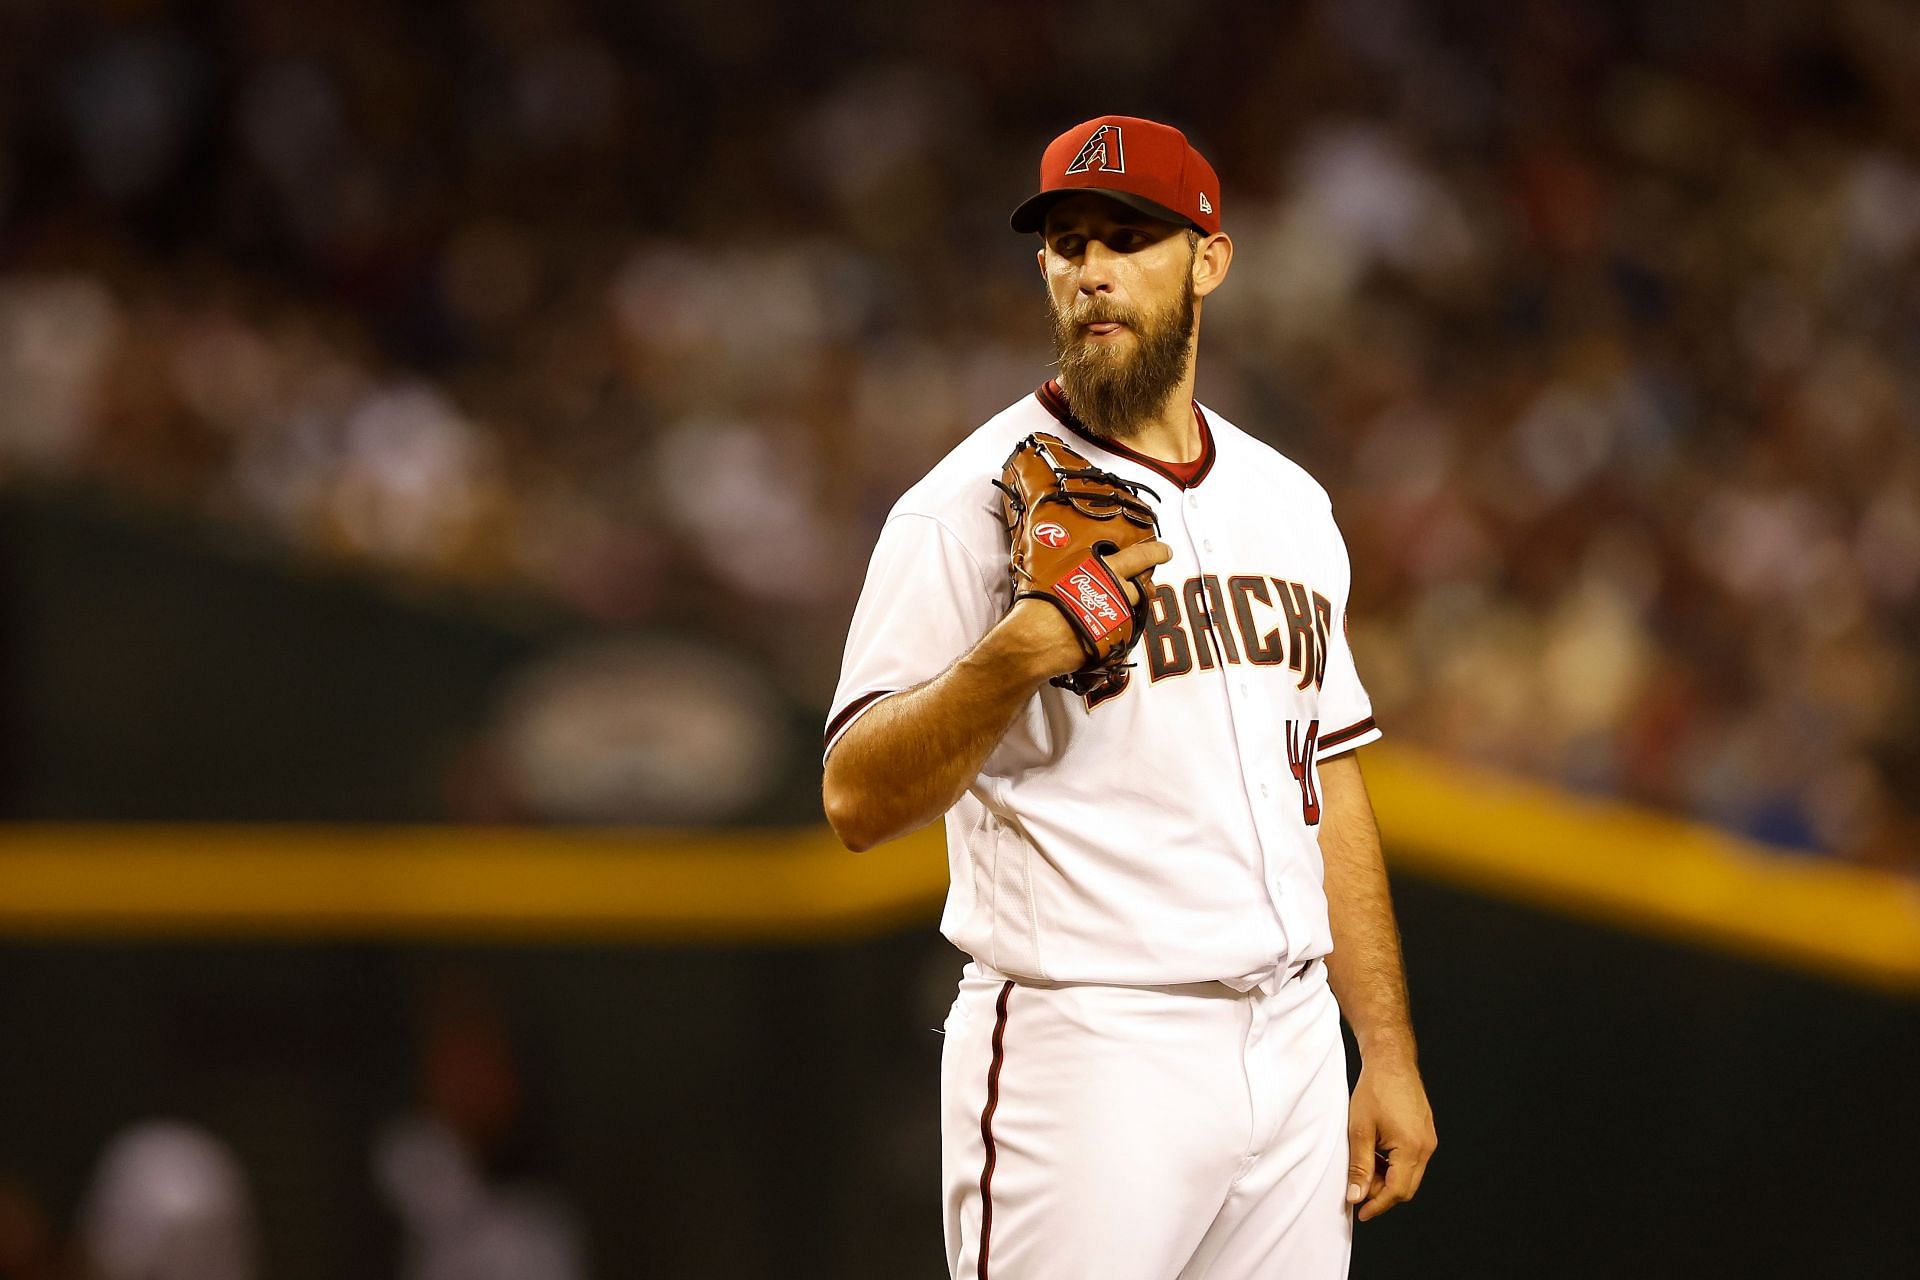 Madison Bumgarner seems past his best but is looking to regain his form